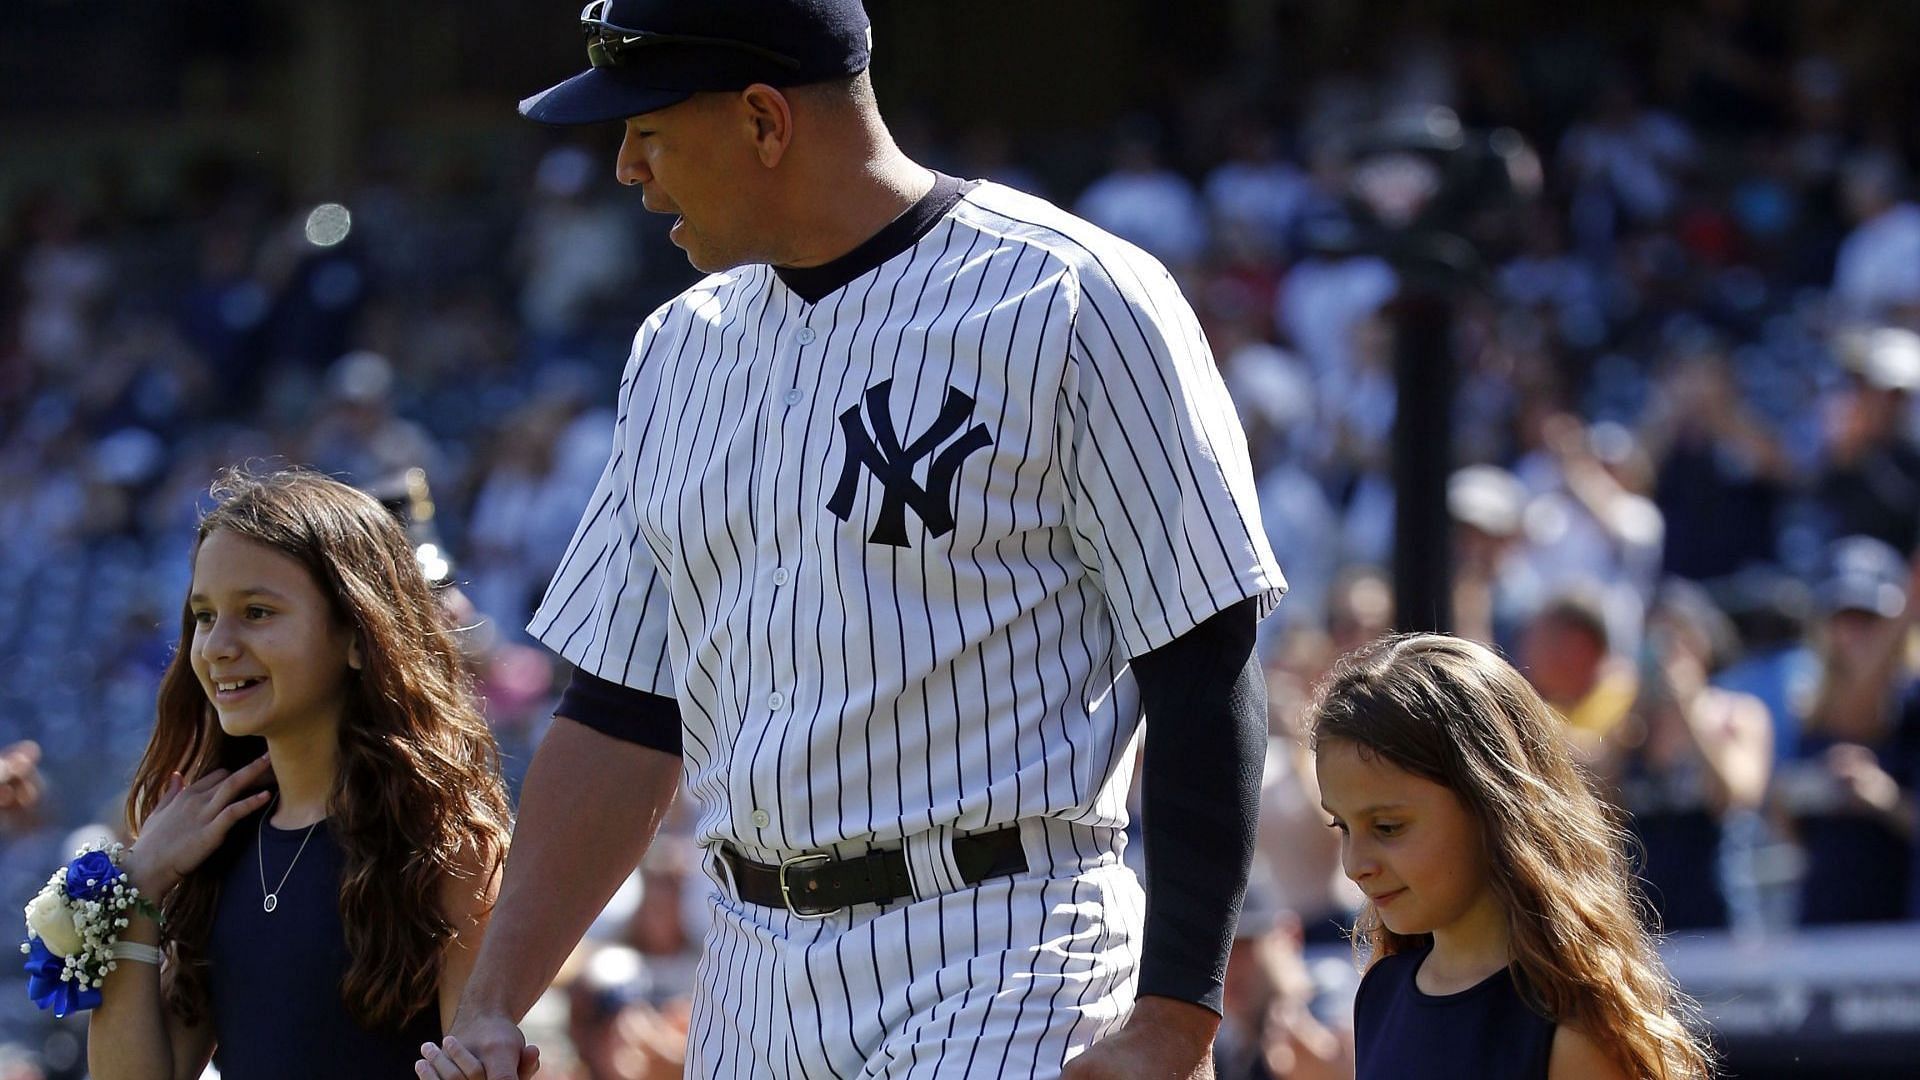 Toronto Blue Jays v New York Yankees. Alex Rodriguez #13 of the New York Yankees and his daughters, Natasha and Ella, walk onto the field for a pregame ceremony celebrating Rodriguez